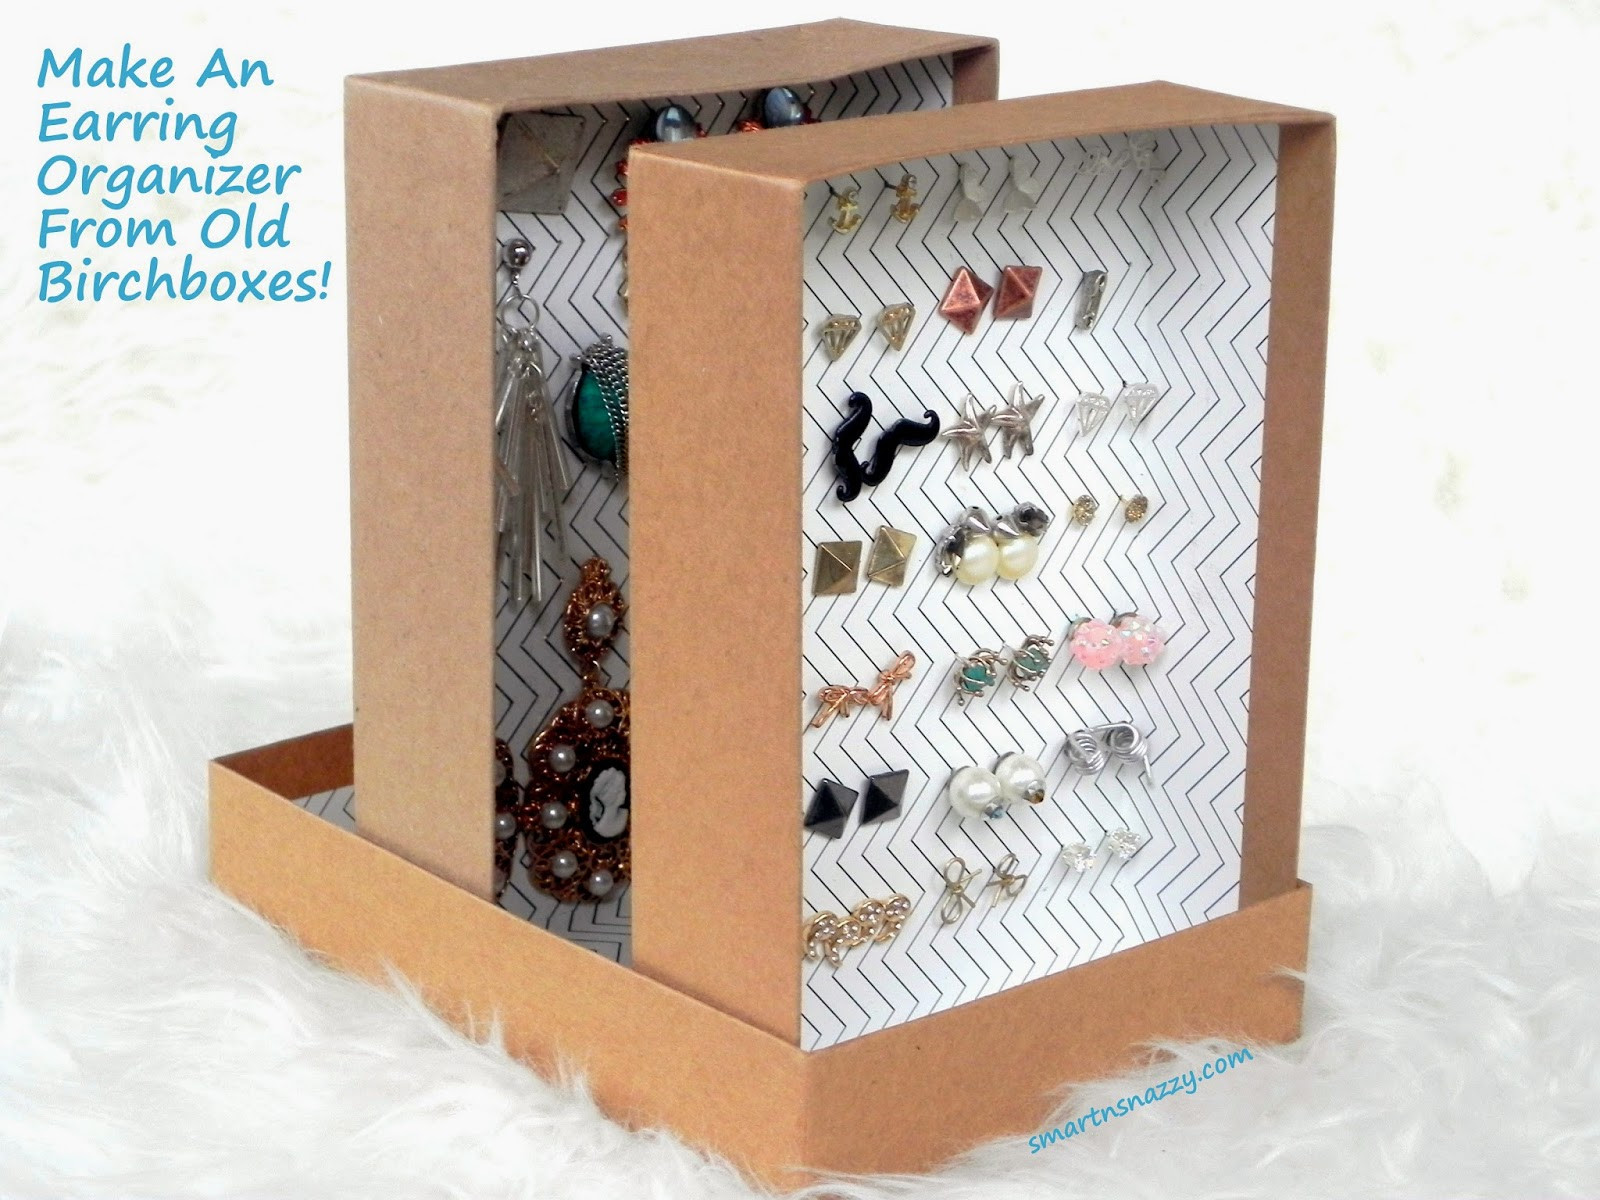 DIY Organization Boxes
 Smart n Snazzy DIY Upcycled Birchboxes Into Earring